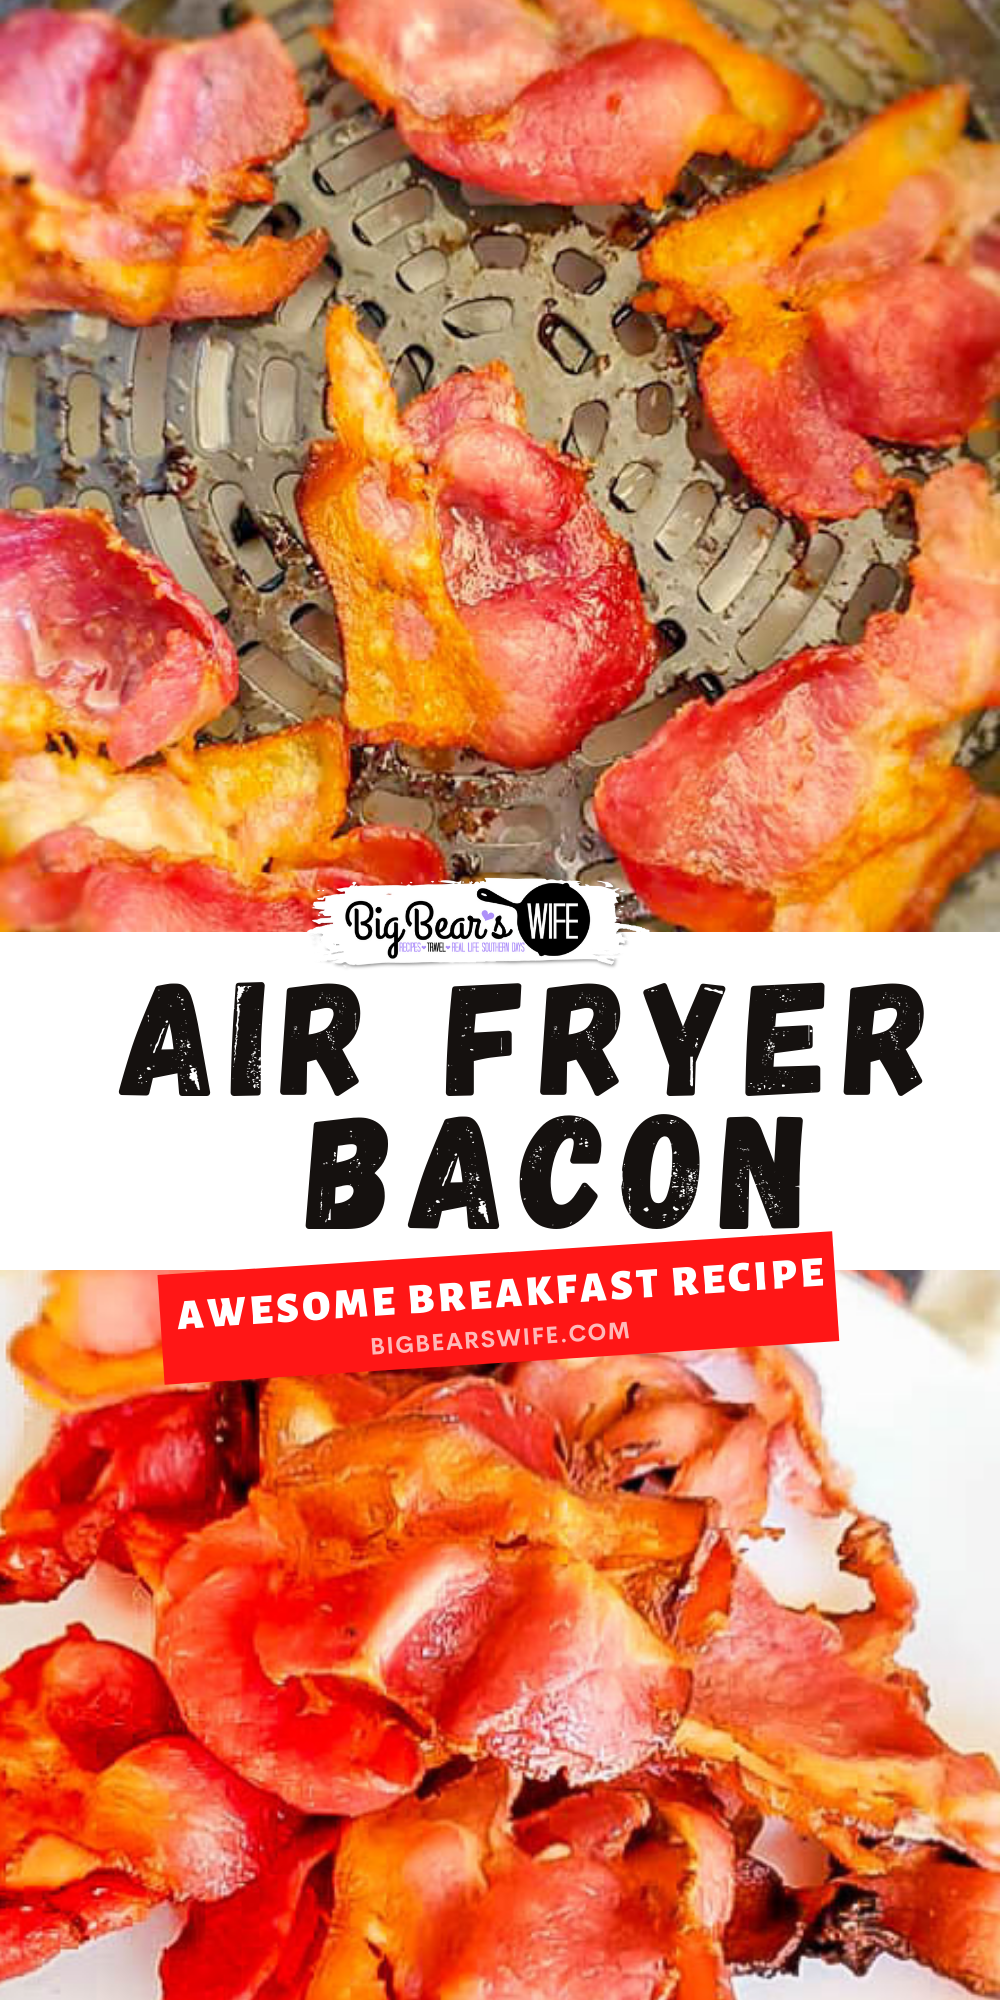 Crisp up delicious bacon without turning the oven on! Use an air fryer to cook perfect crispy Air Fryer Bacon with no skillet babysitting! via @bigbearswife